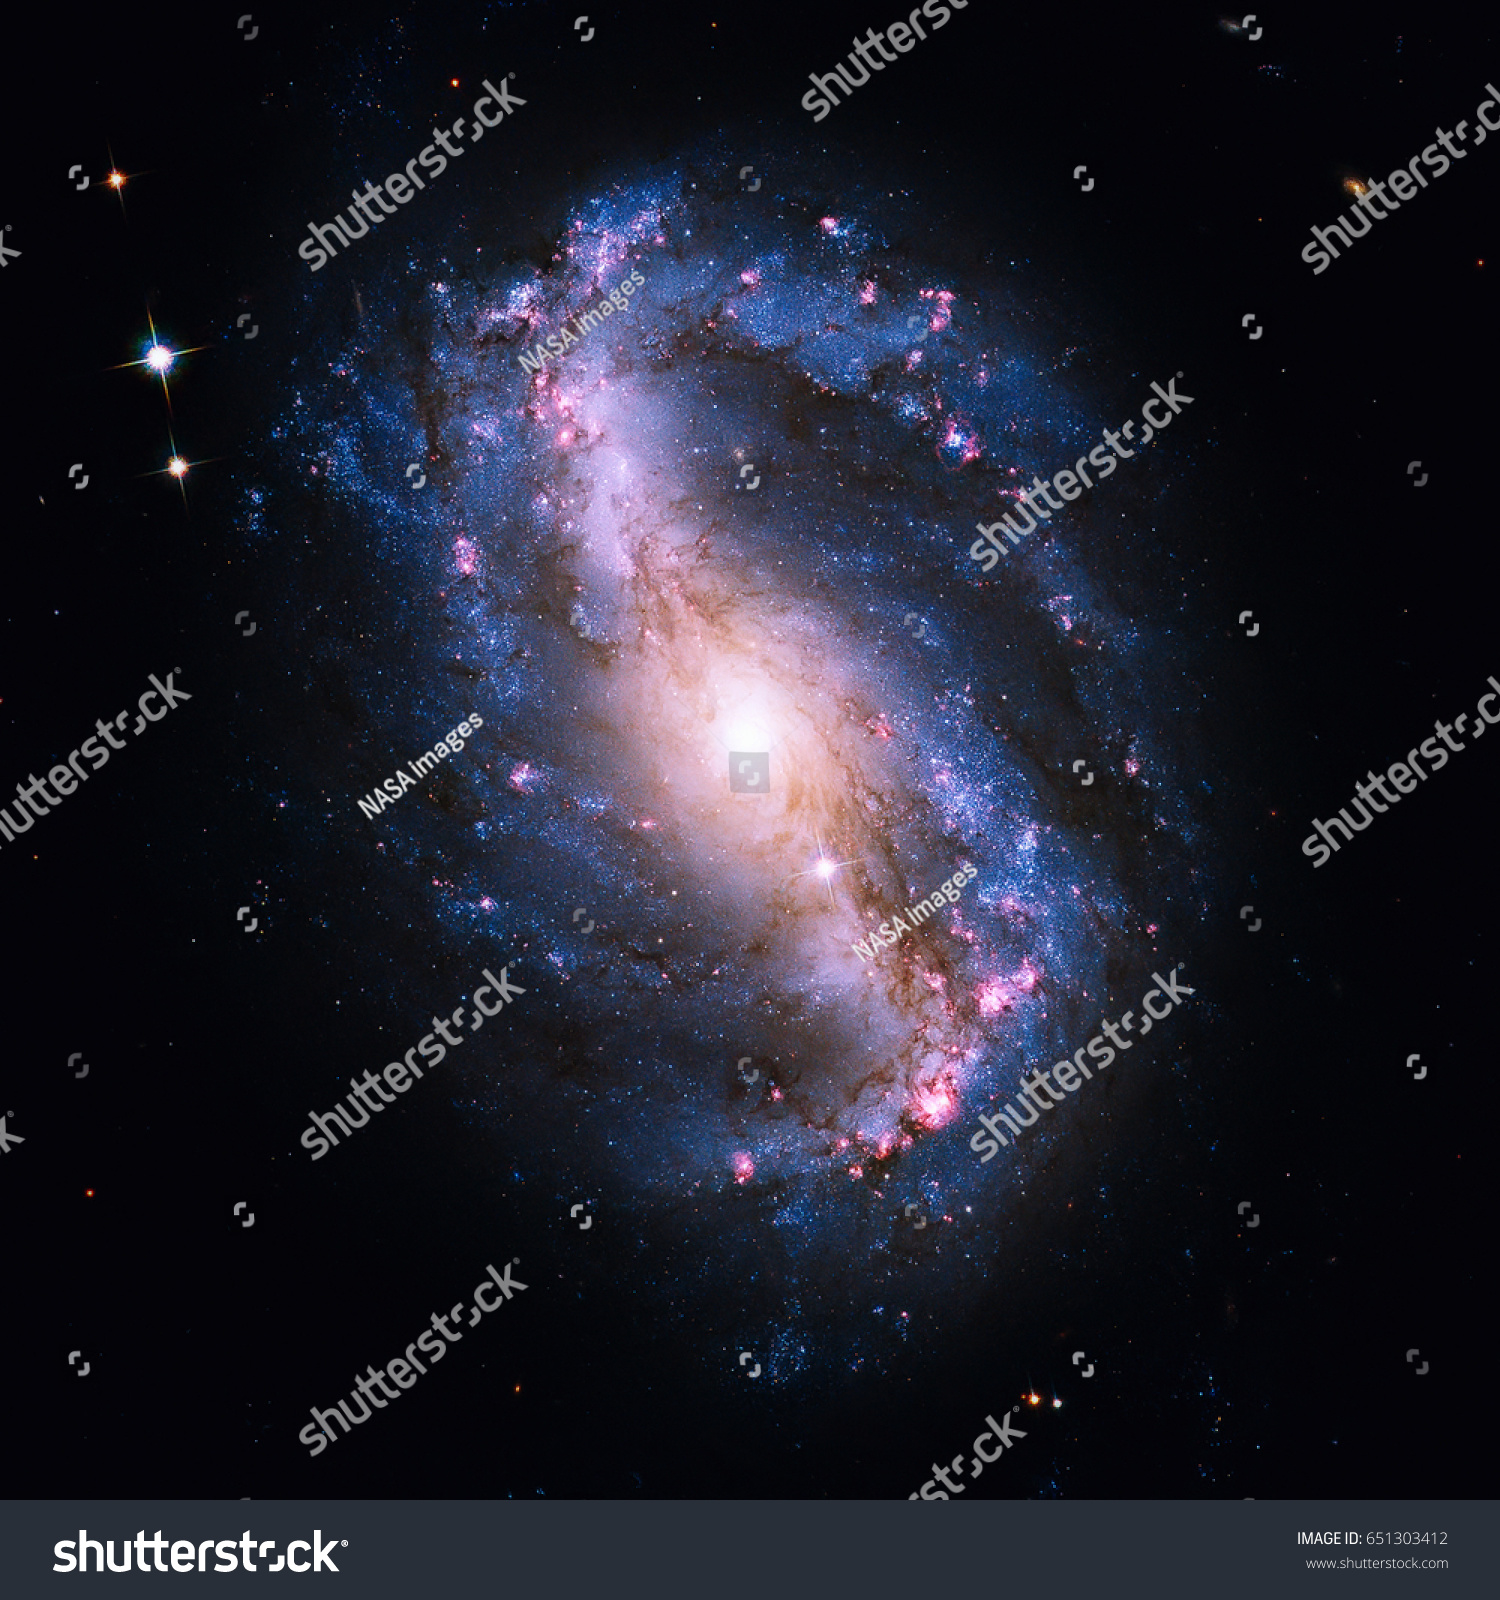 NGC 6217 is a barred spiral galaxy located some 67 million light years away, in the constellation Ursa Minor. Retouched image. Elements of this image furnished by NASA. #651303412